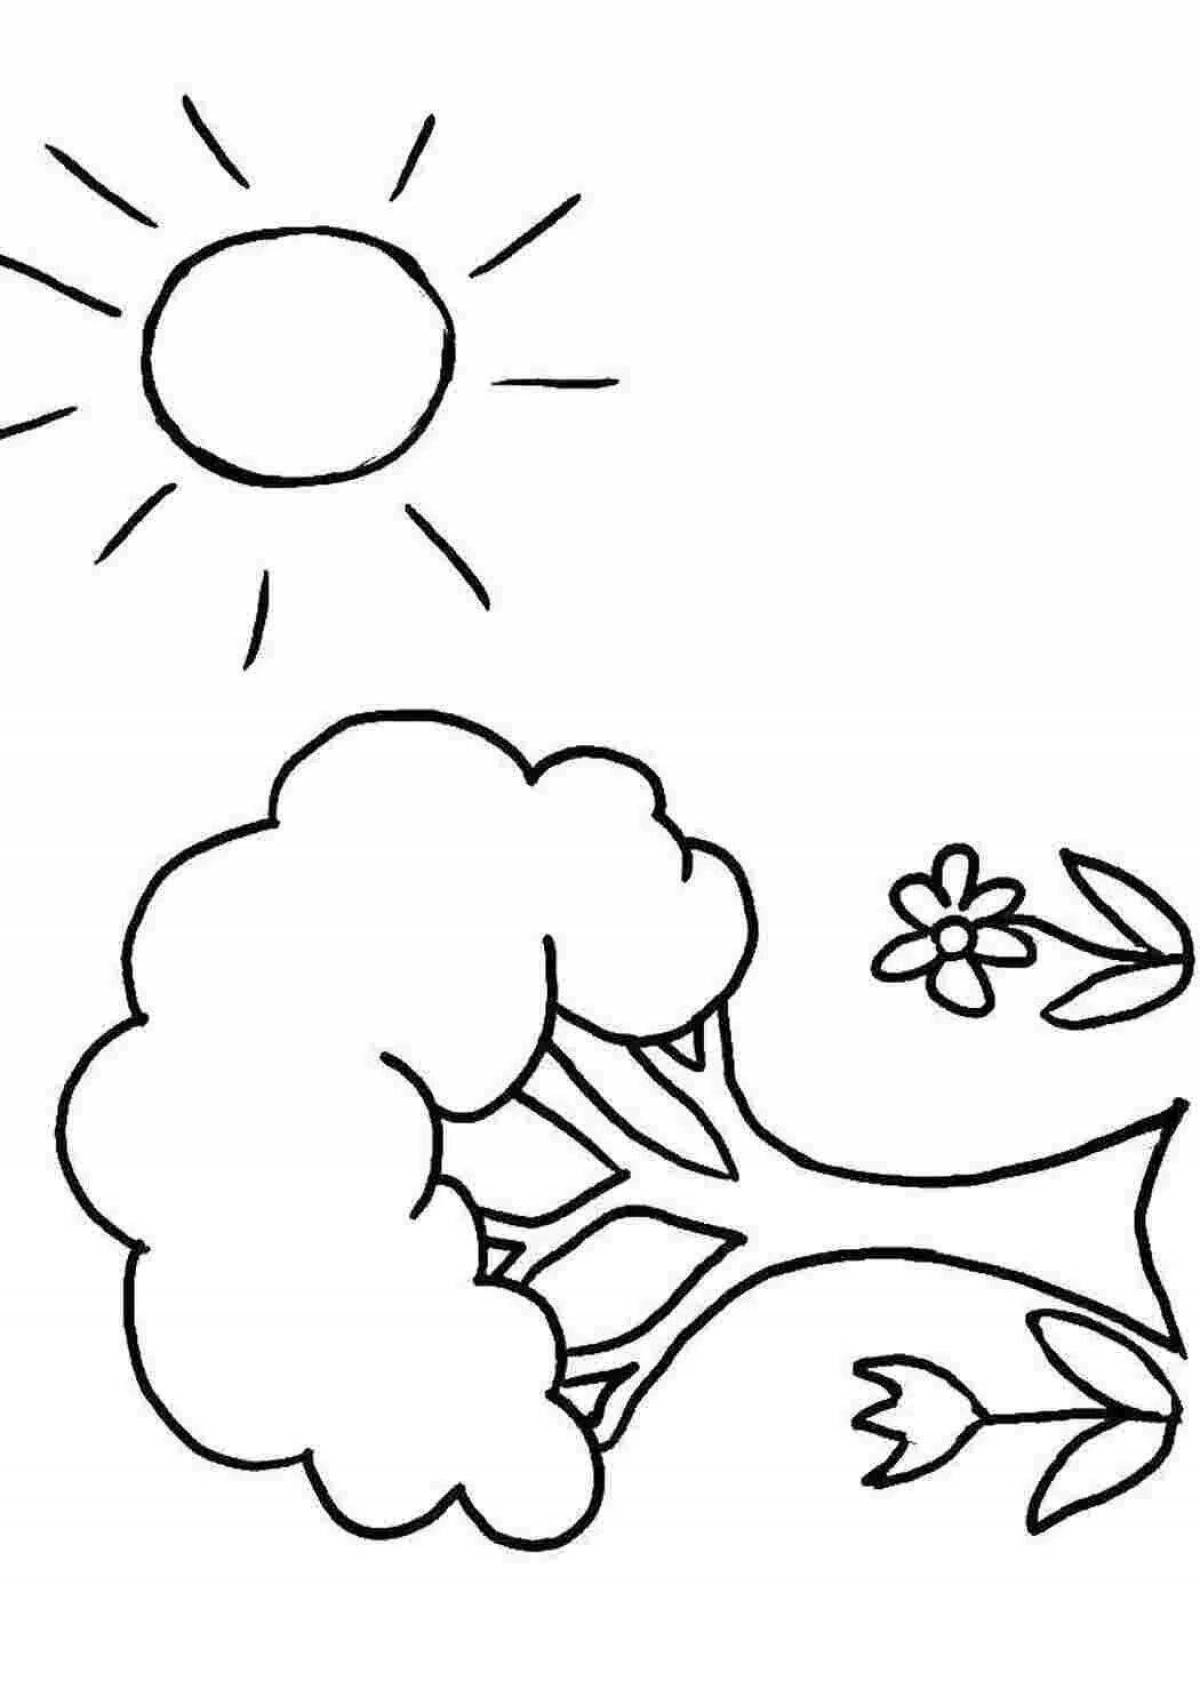 Adorable nature coloring book for 3-4 year olds